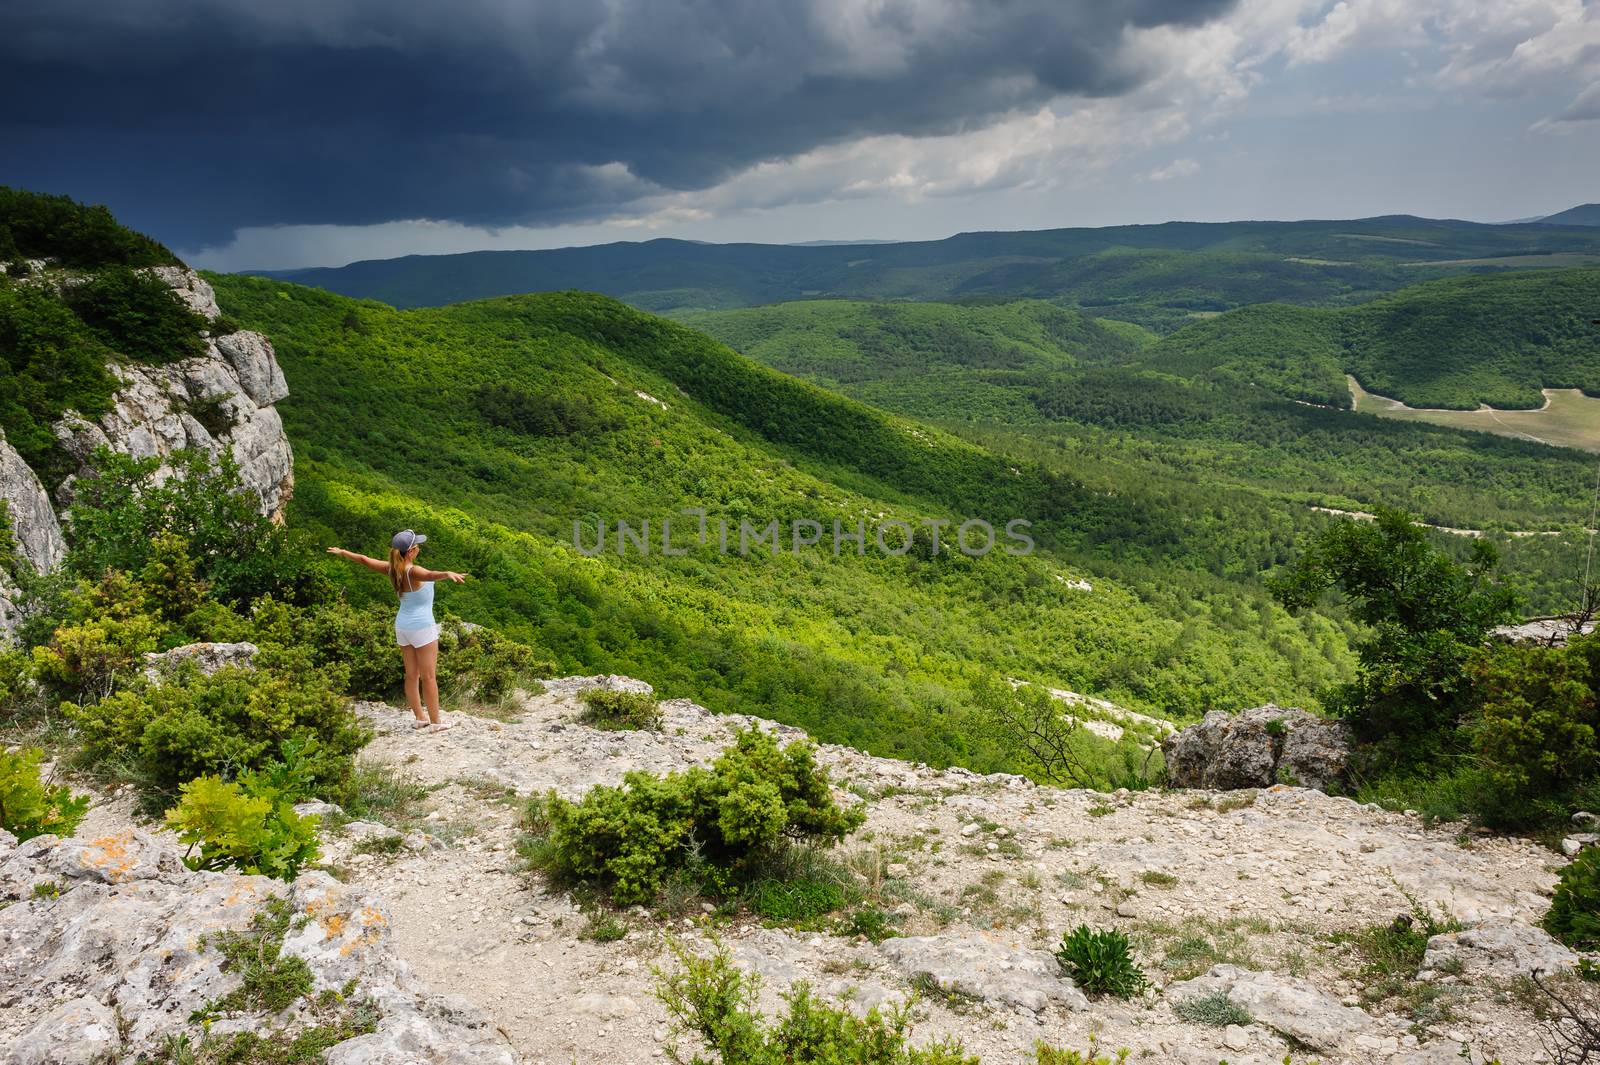 Young woman enjoying the storm at the edge of the cliff, Crimea, Ukraine